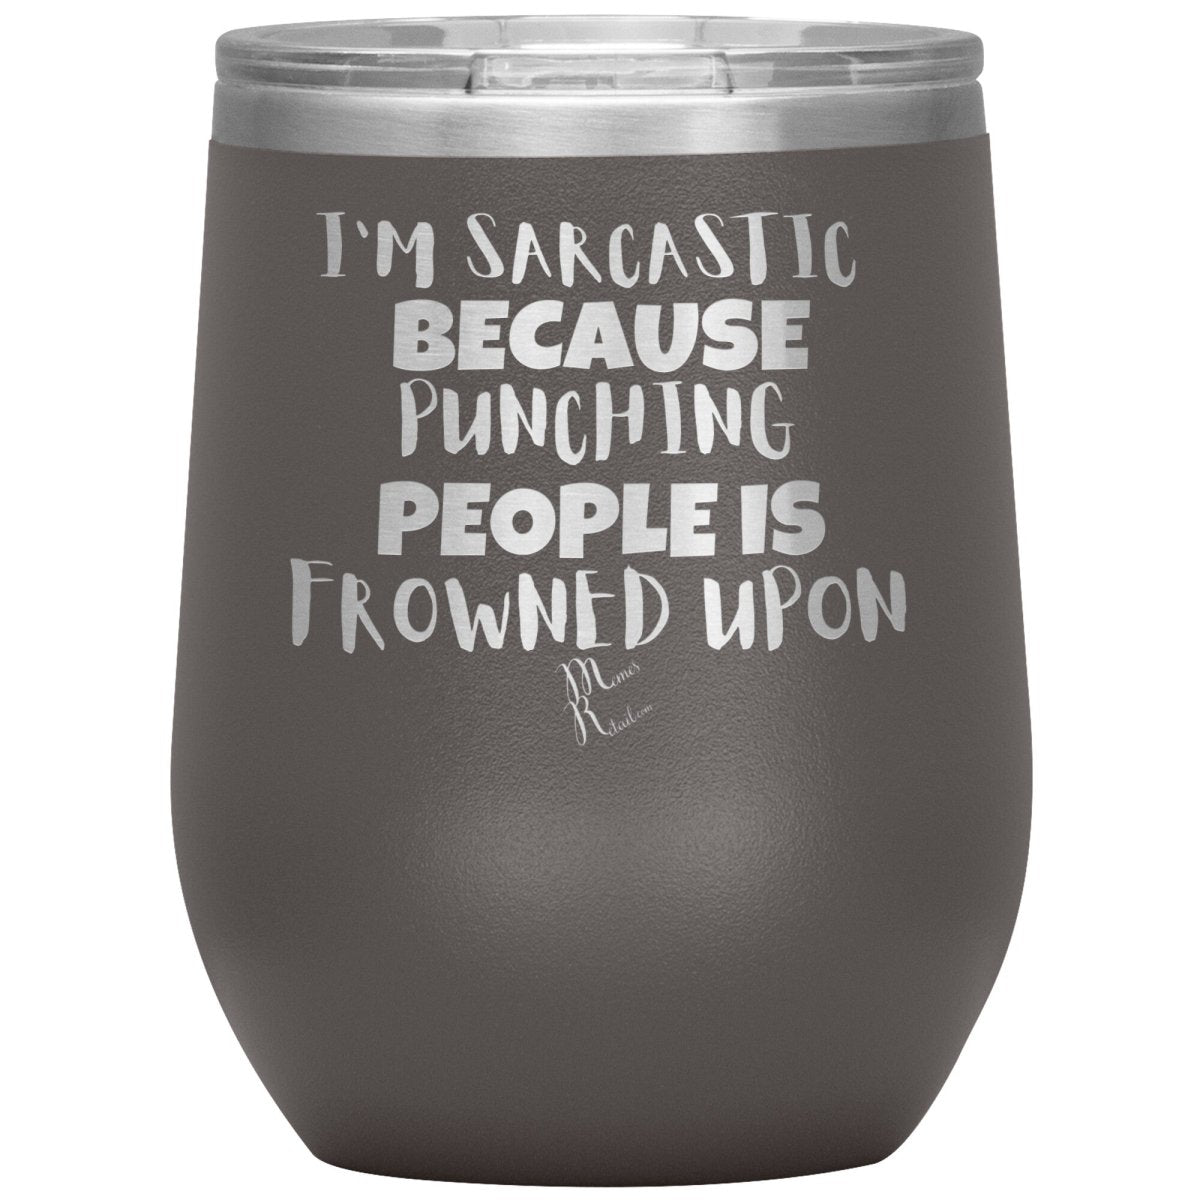 I'm Sarcastic Because Punching People is Frowned Upon Tumblers, 12oz Wine Insulated Tumbler / Pewter - MemesRetail.com